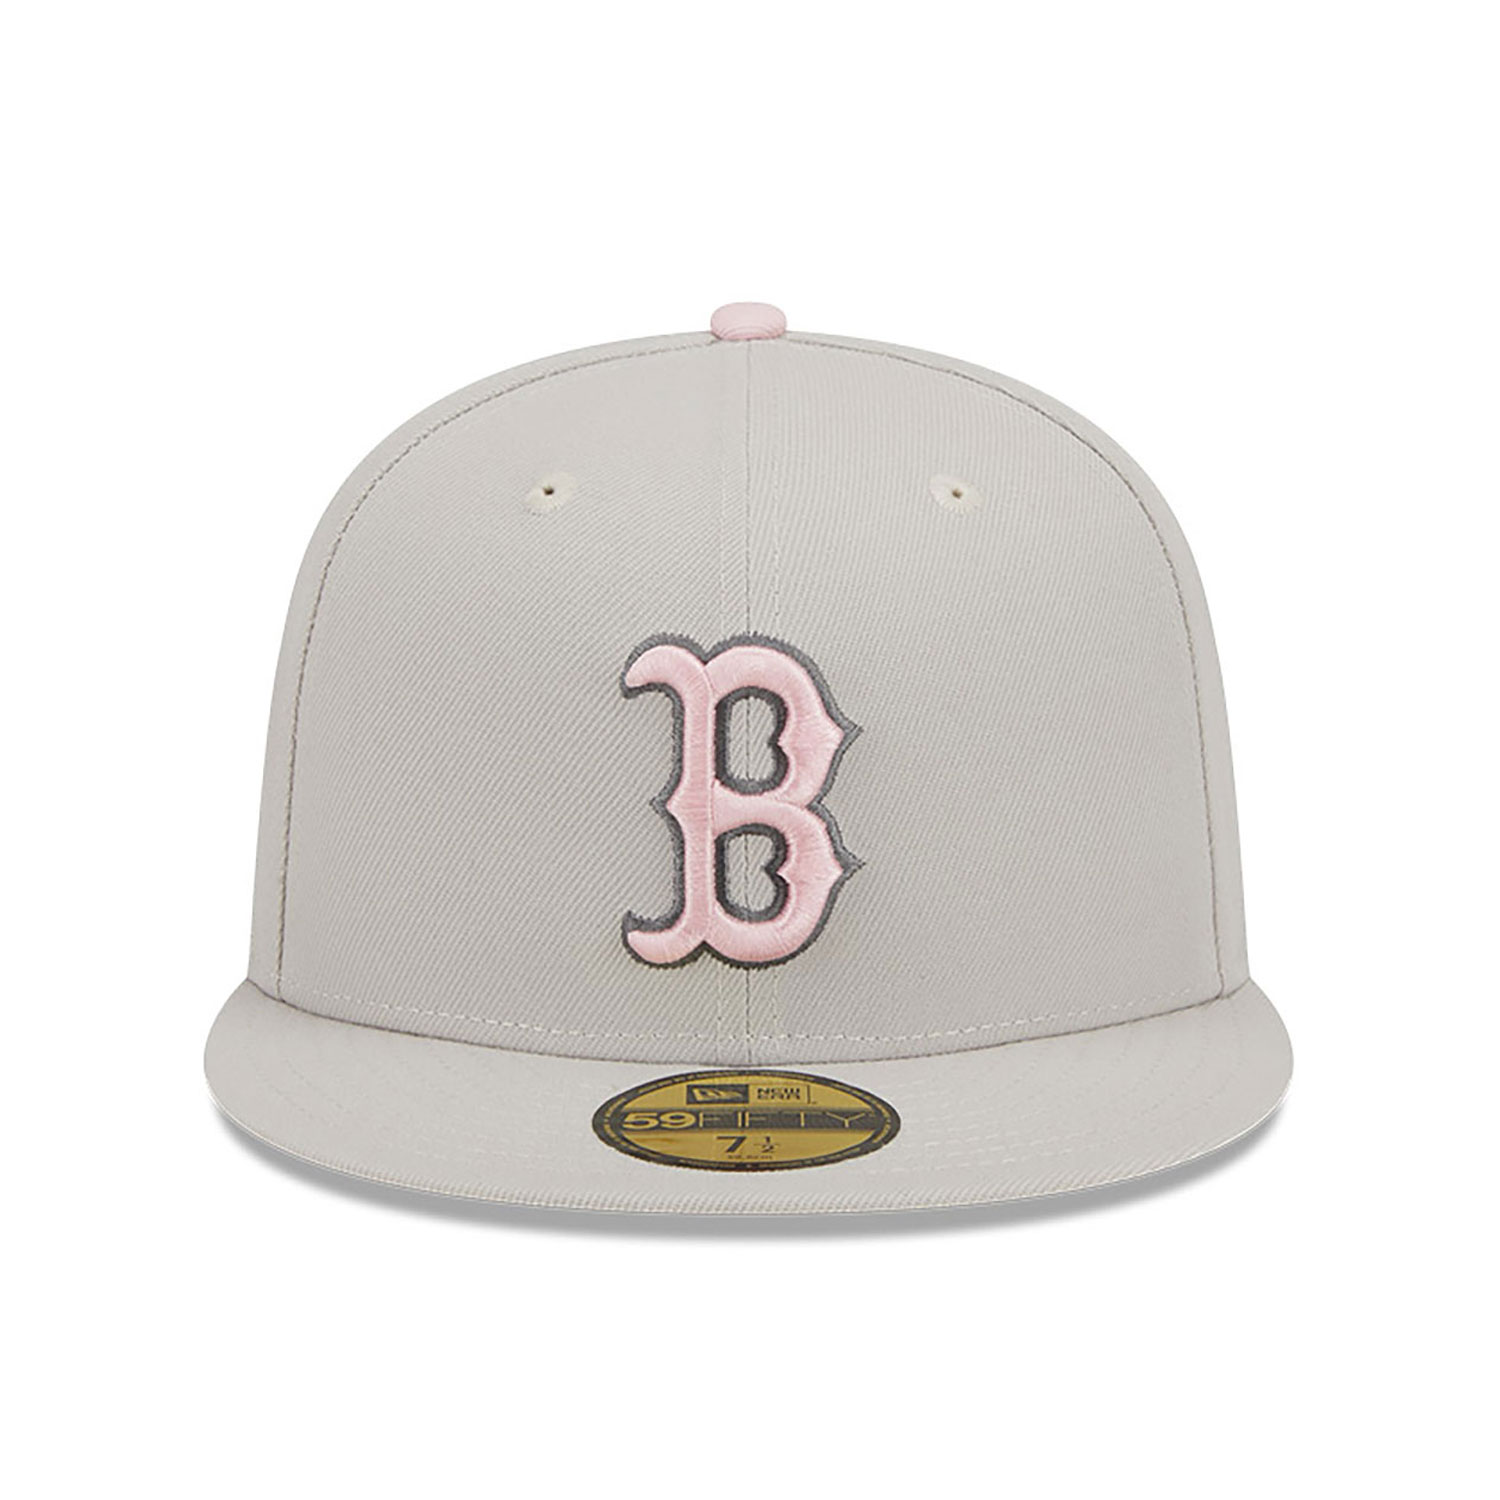 Official New Era MLB Mothers Day Boston Red Sox 59FIFTY Fitted Cap D01